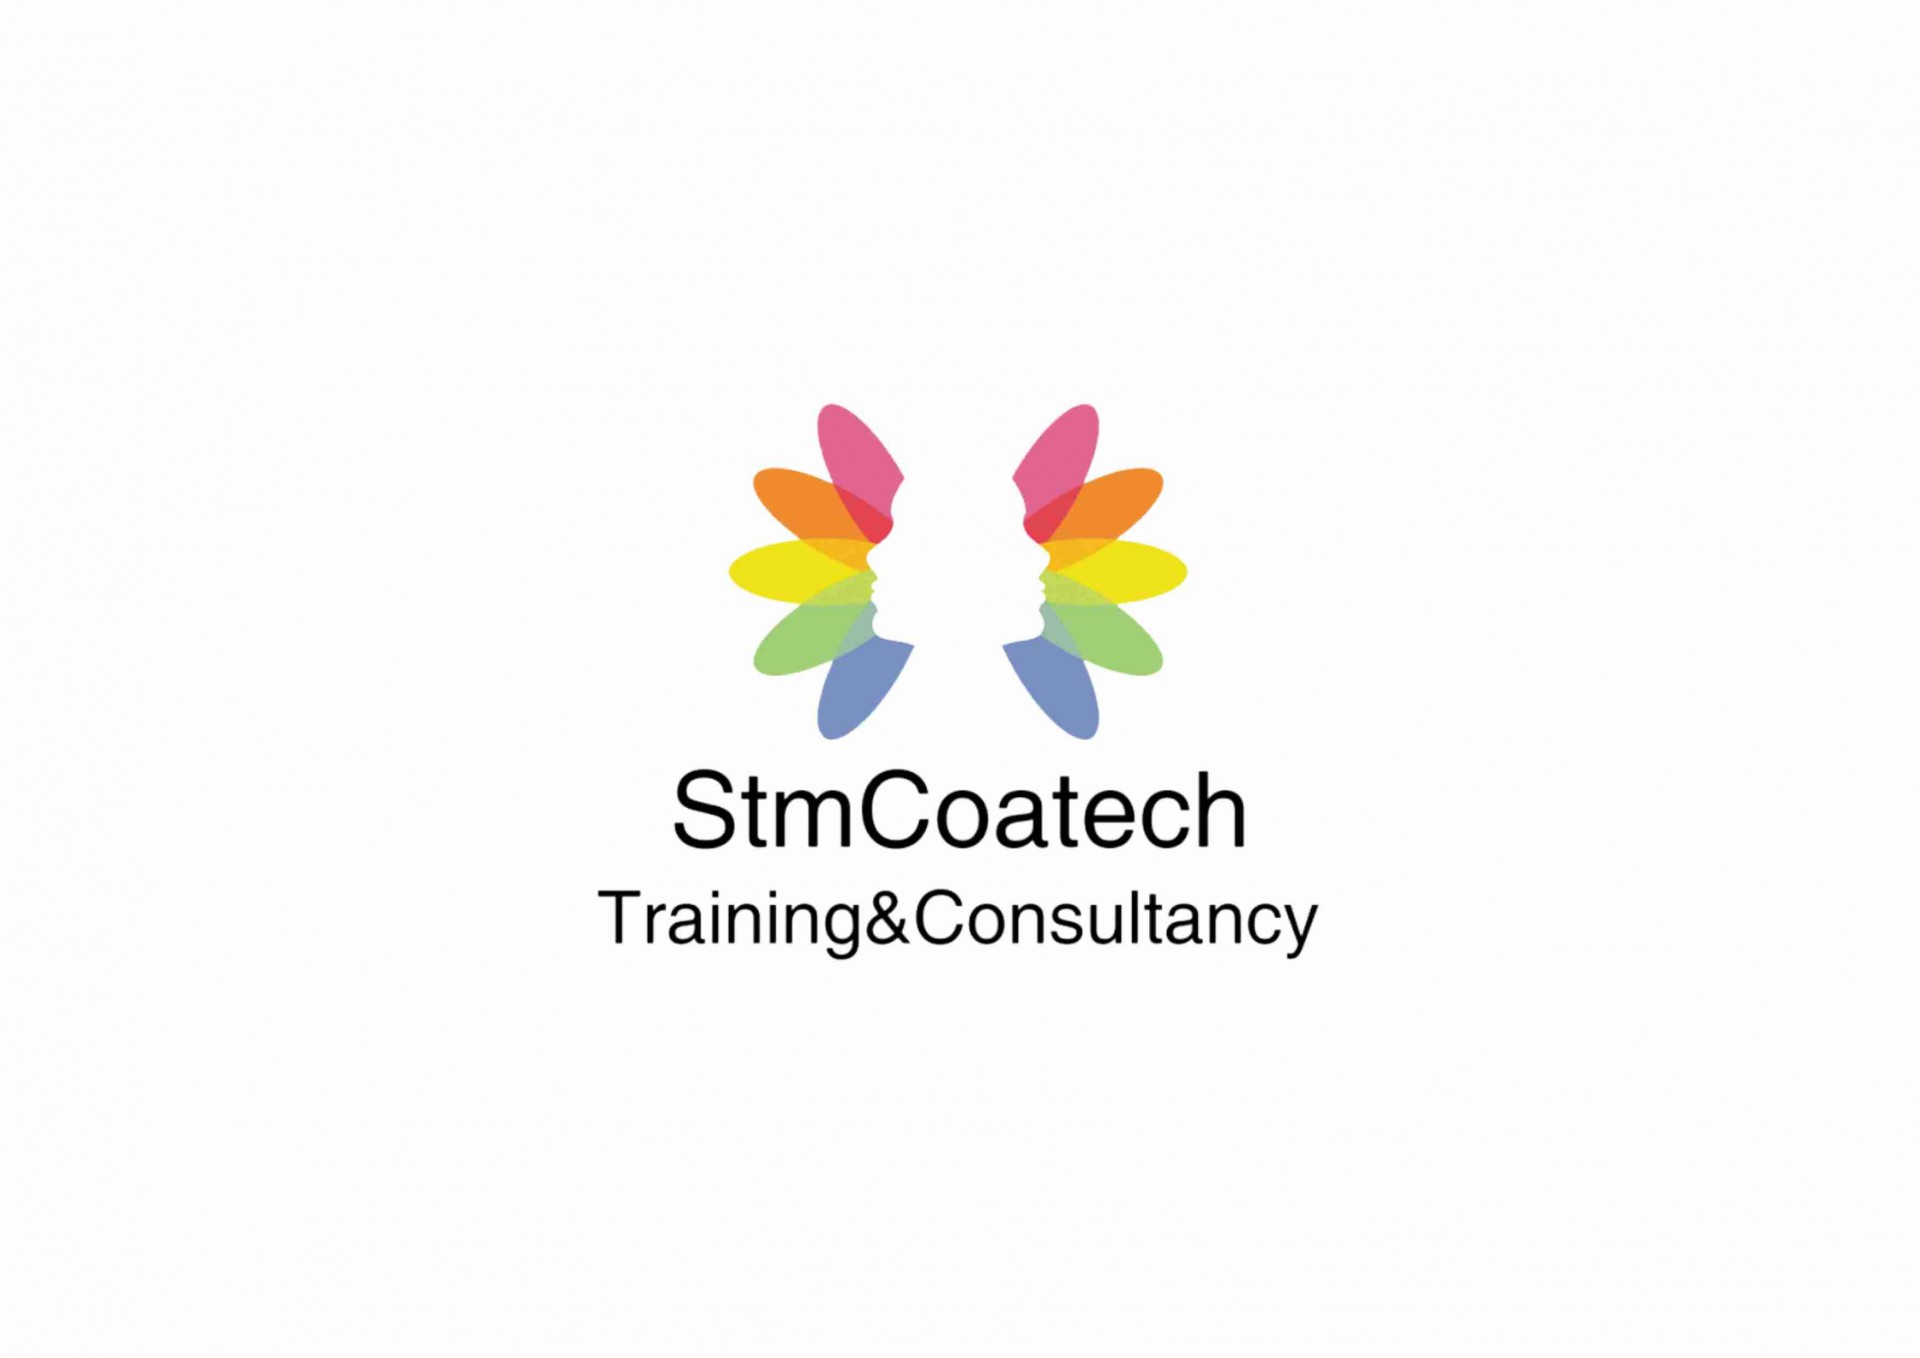 Our Partnership with "Stm Coatech"!